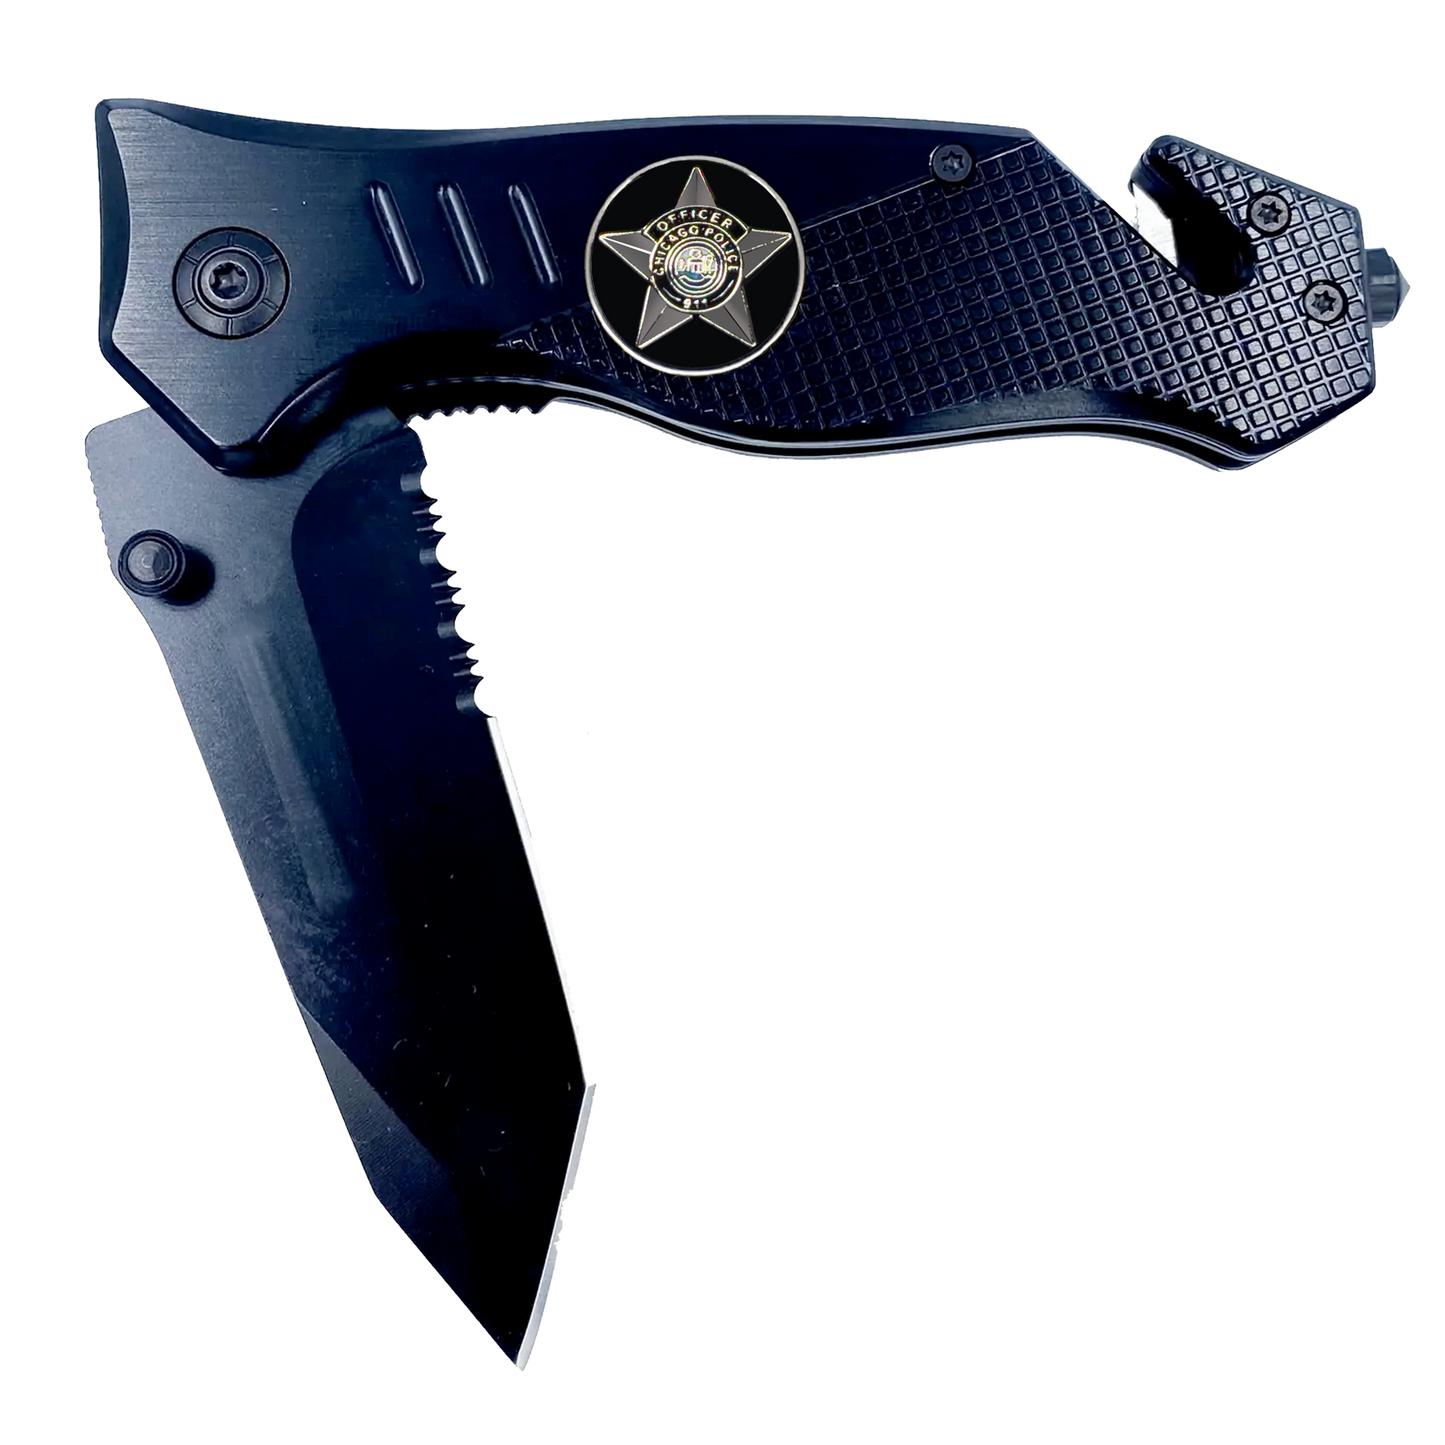 Chicago Police Department CPD 3-in-1 Tactical Rescue knife tool with Seatbelt Cutter, Steel Serrated Blade, Glass breaker